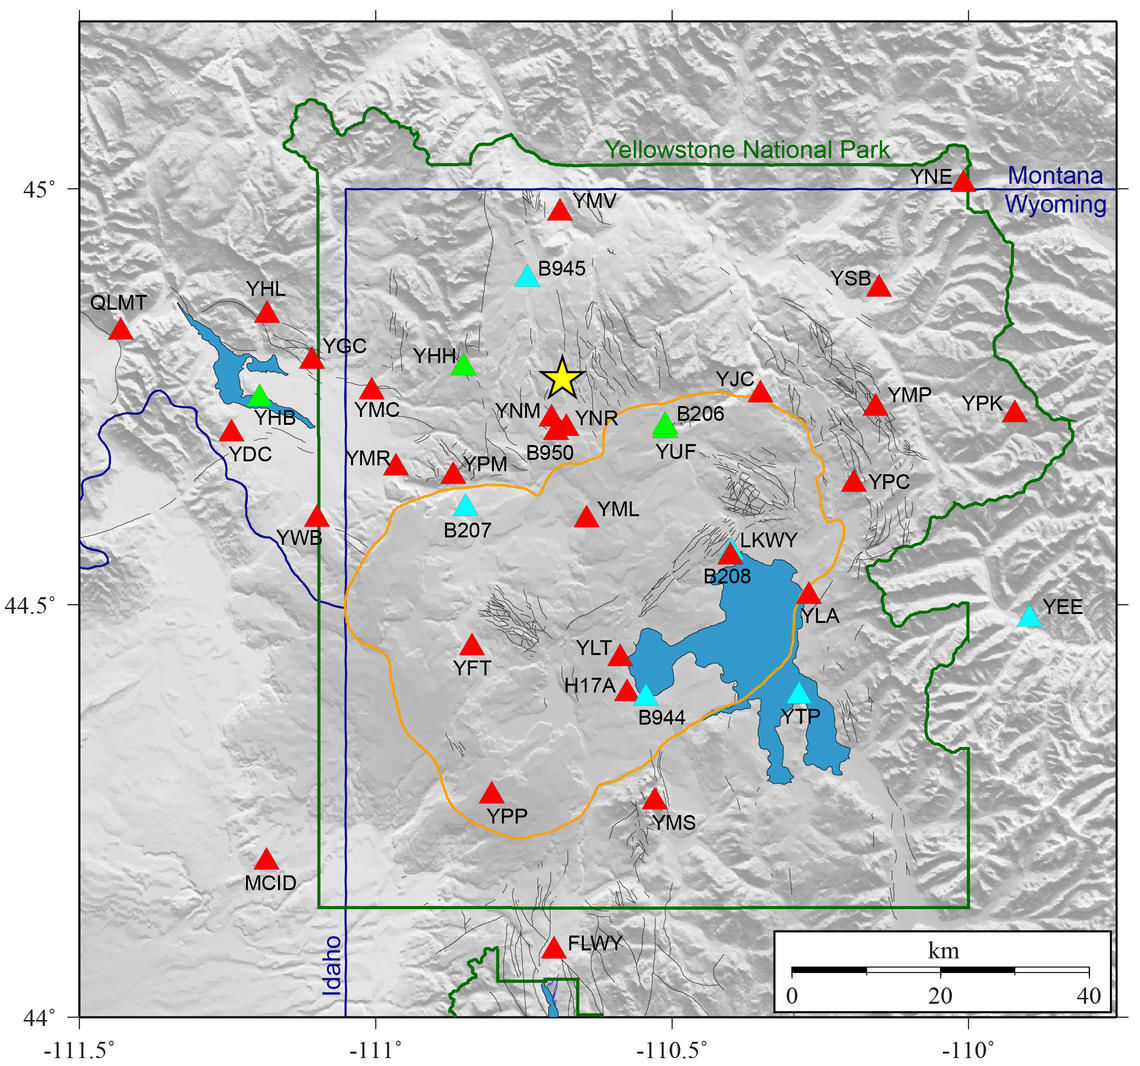 Caldera chronicles How earthquakes are located in the Yellowstone region